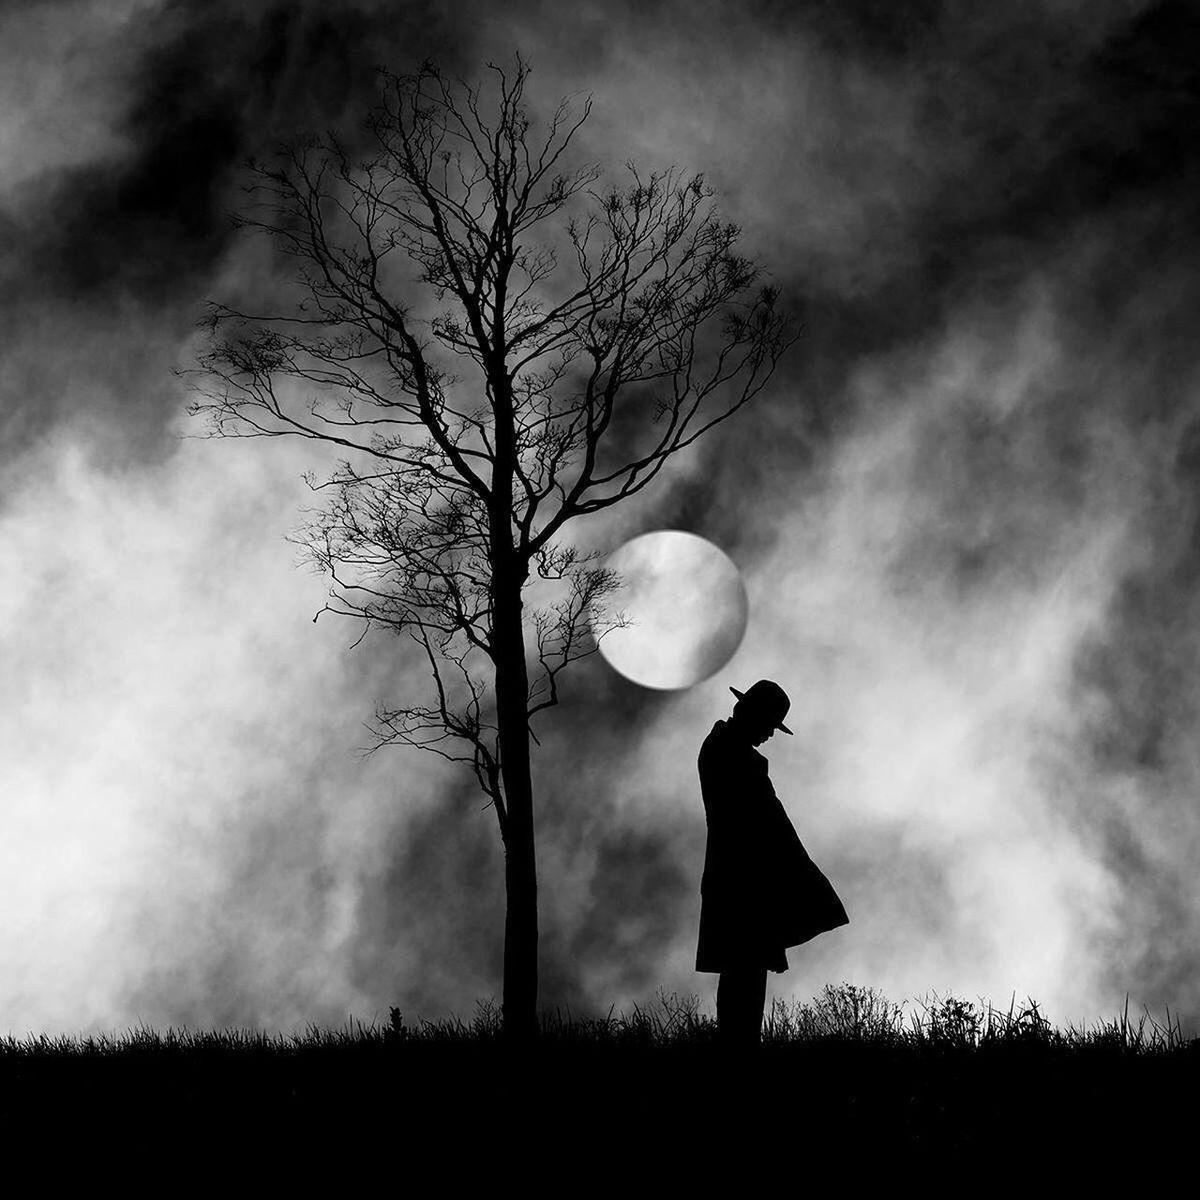 Man standing by tree against moon at night